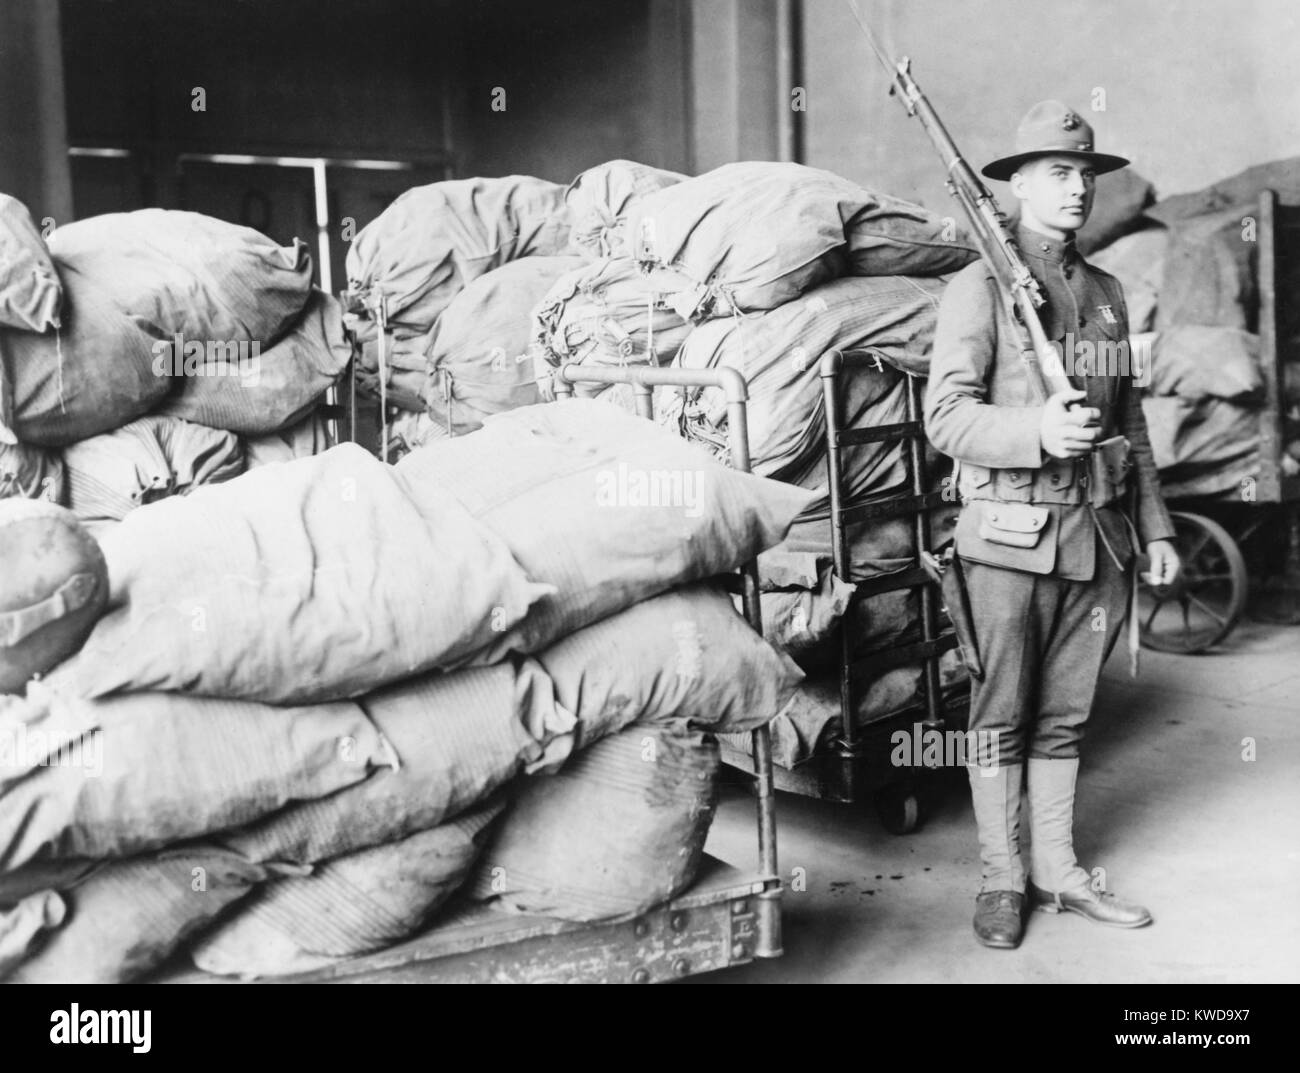 U.S. Marine standing guard over sacks of mail, Washington, D.C. From 1919 to 1921, about $6 million was lost to mail robbers, who targeted Register Mail, which was used to send cash, jewelry, and negotiable securities (BSLOC 2016 10 91) Stock Photo